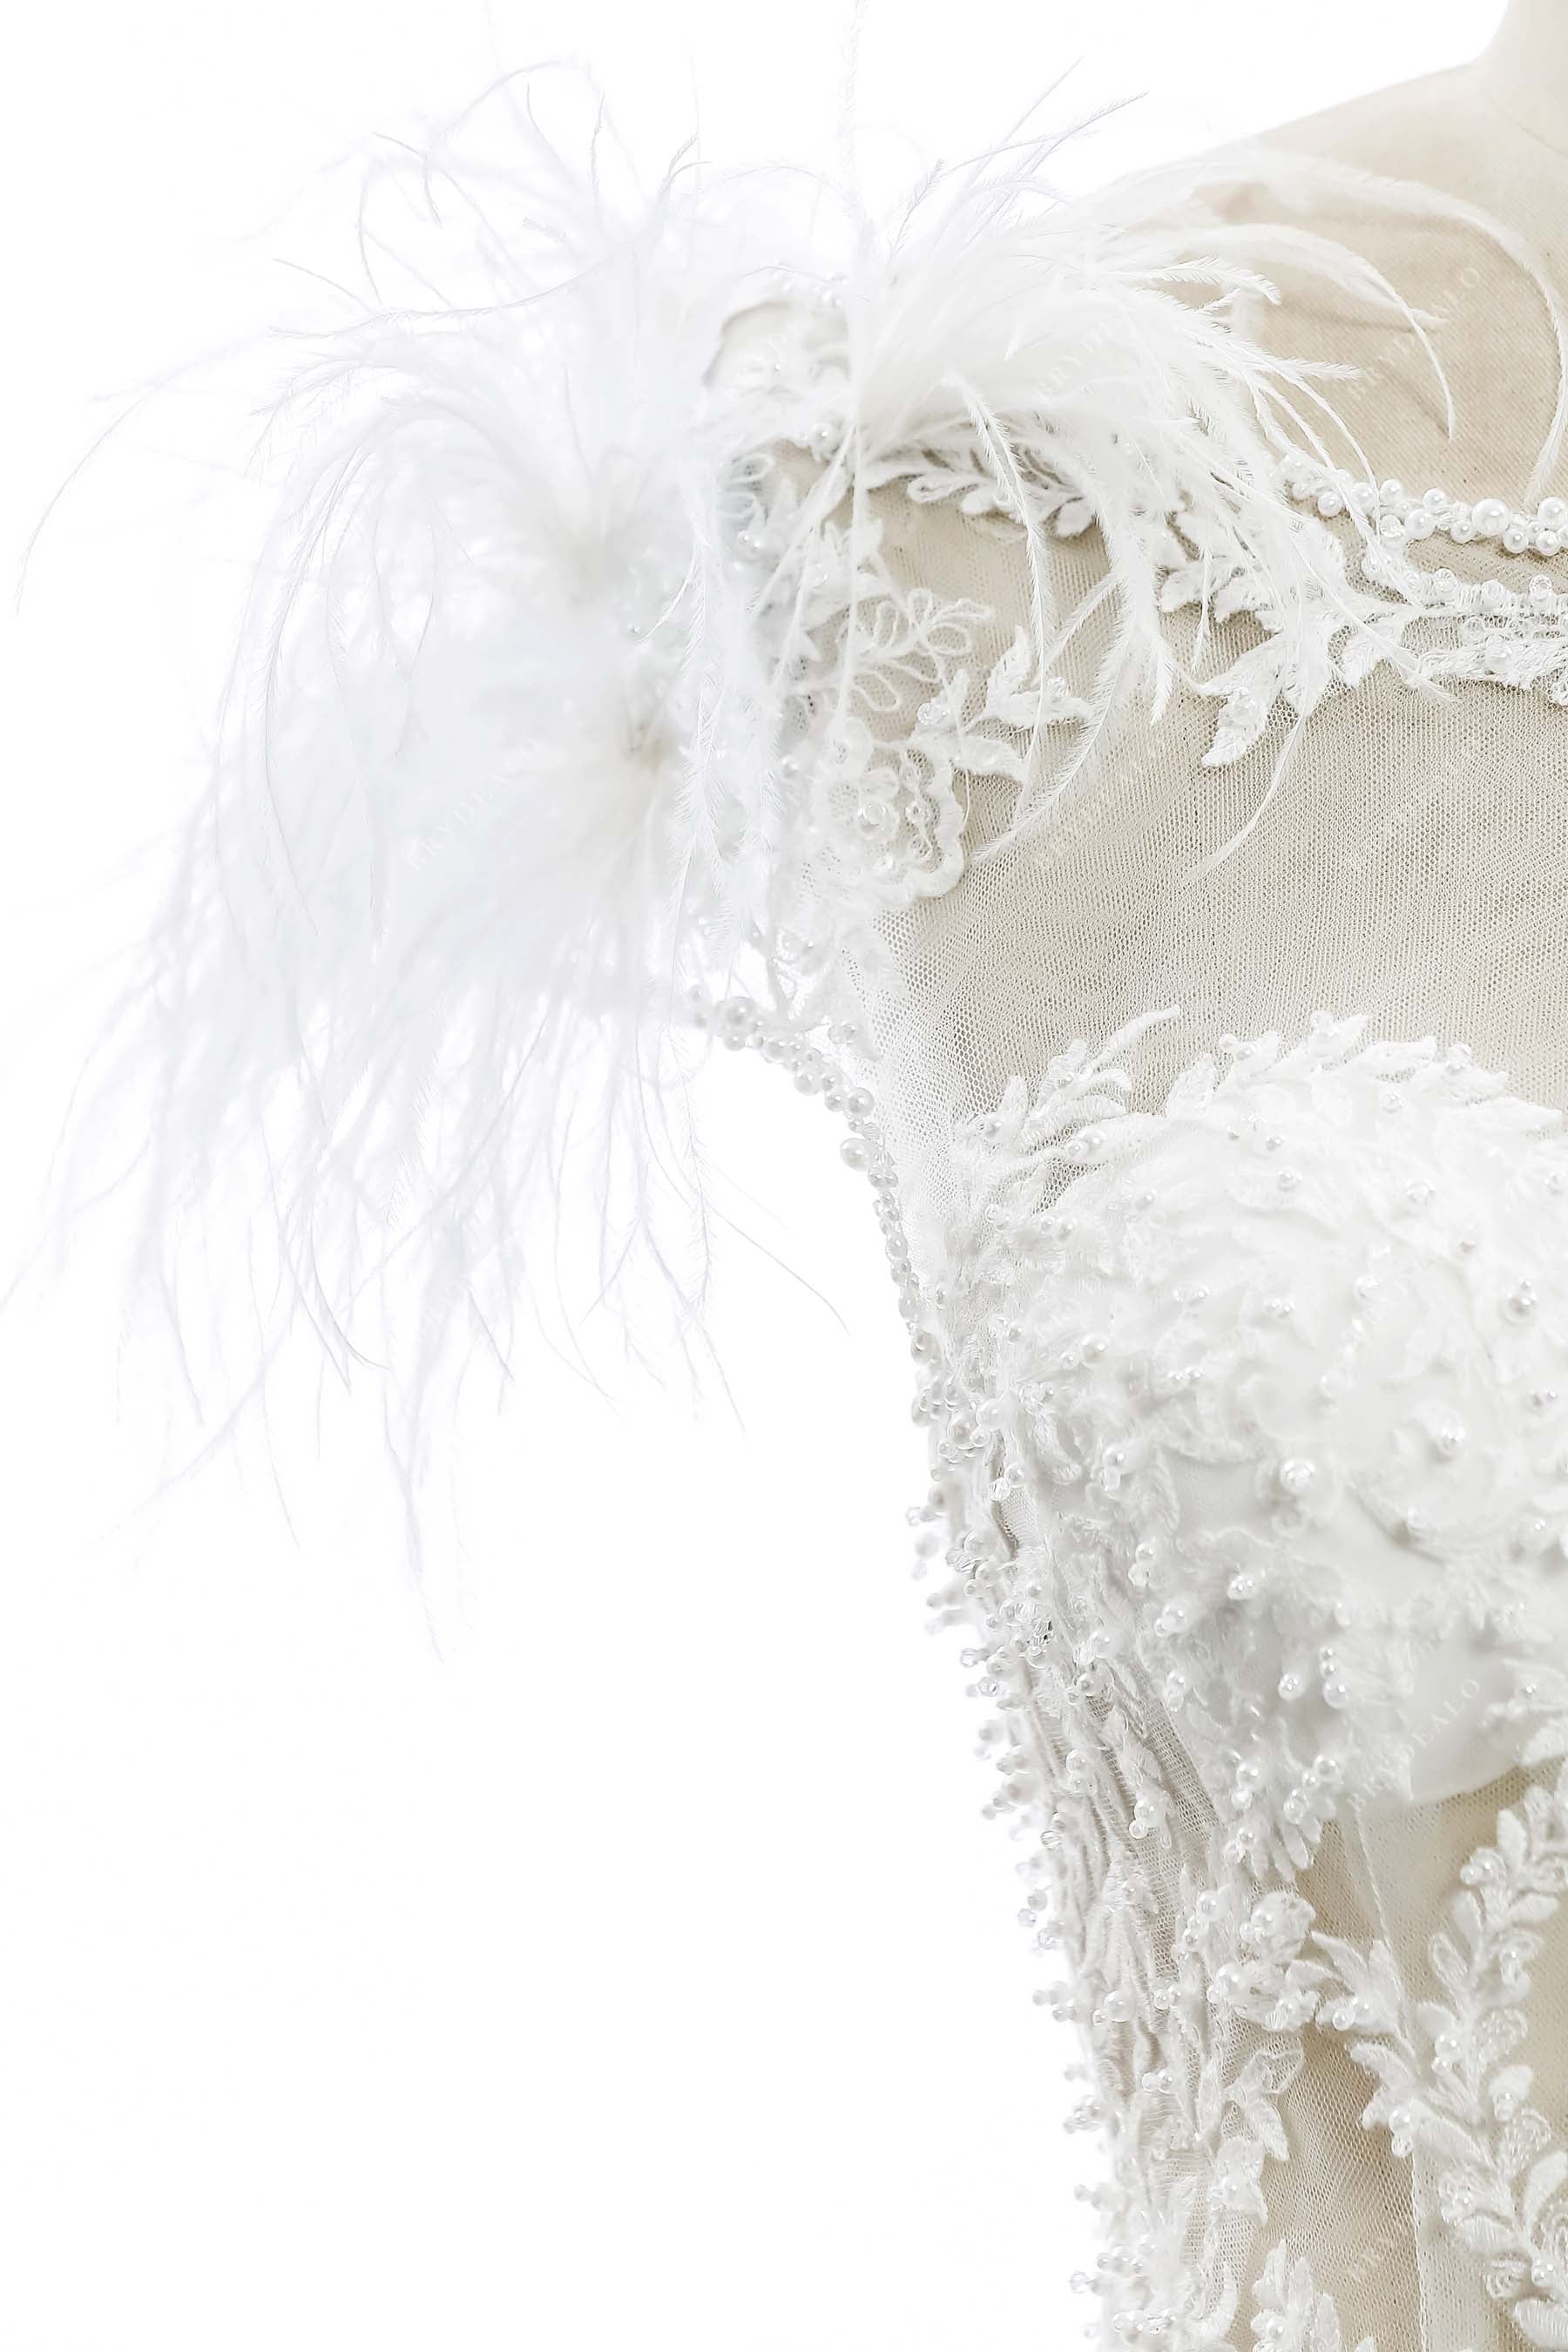 fashion feathered sheer lace wedding gown